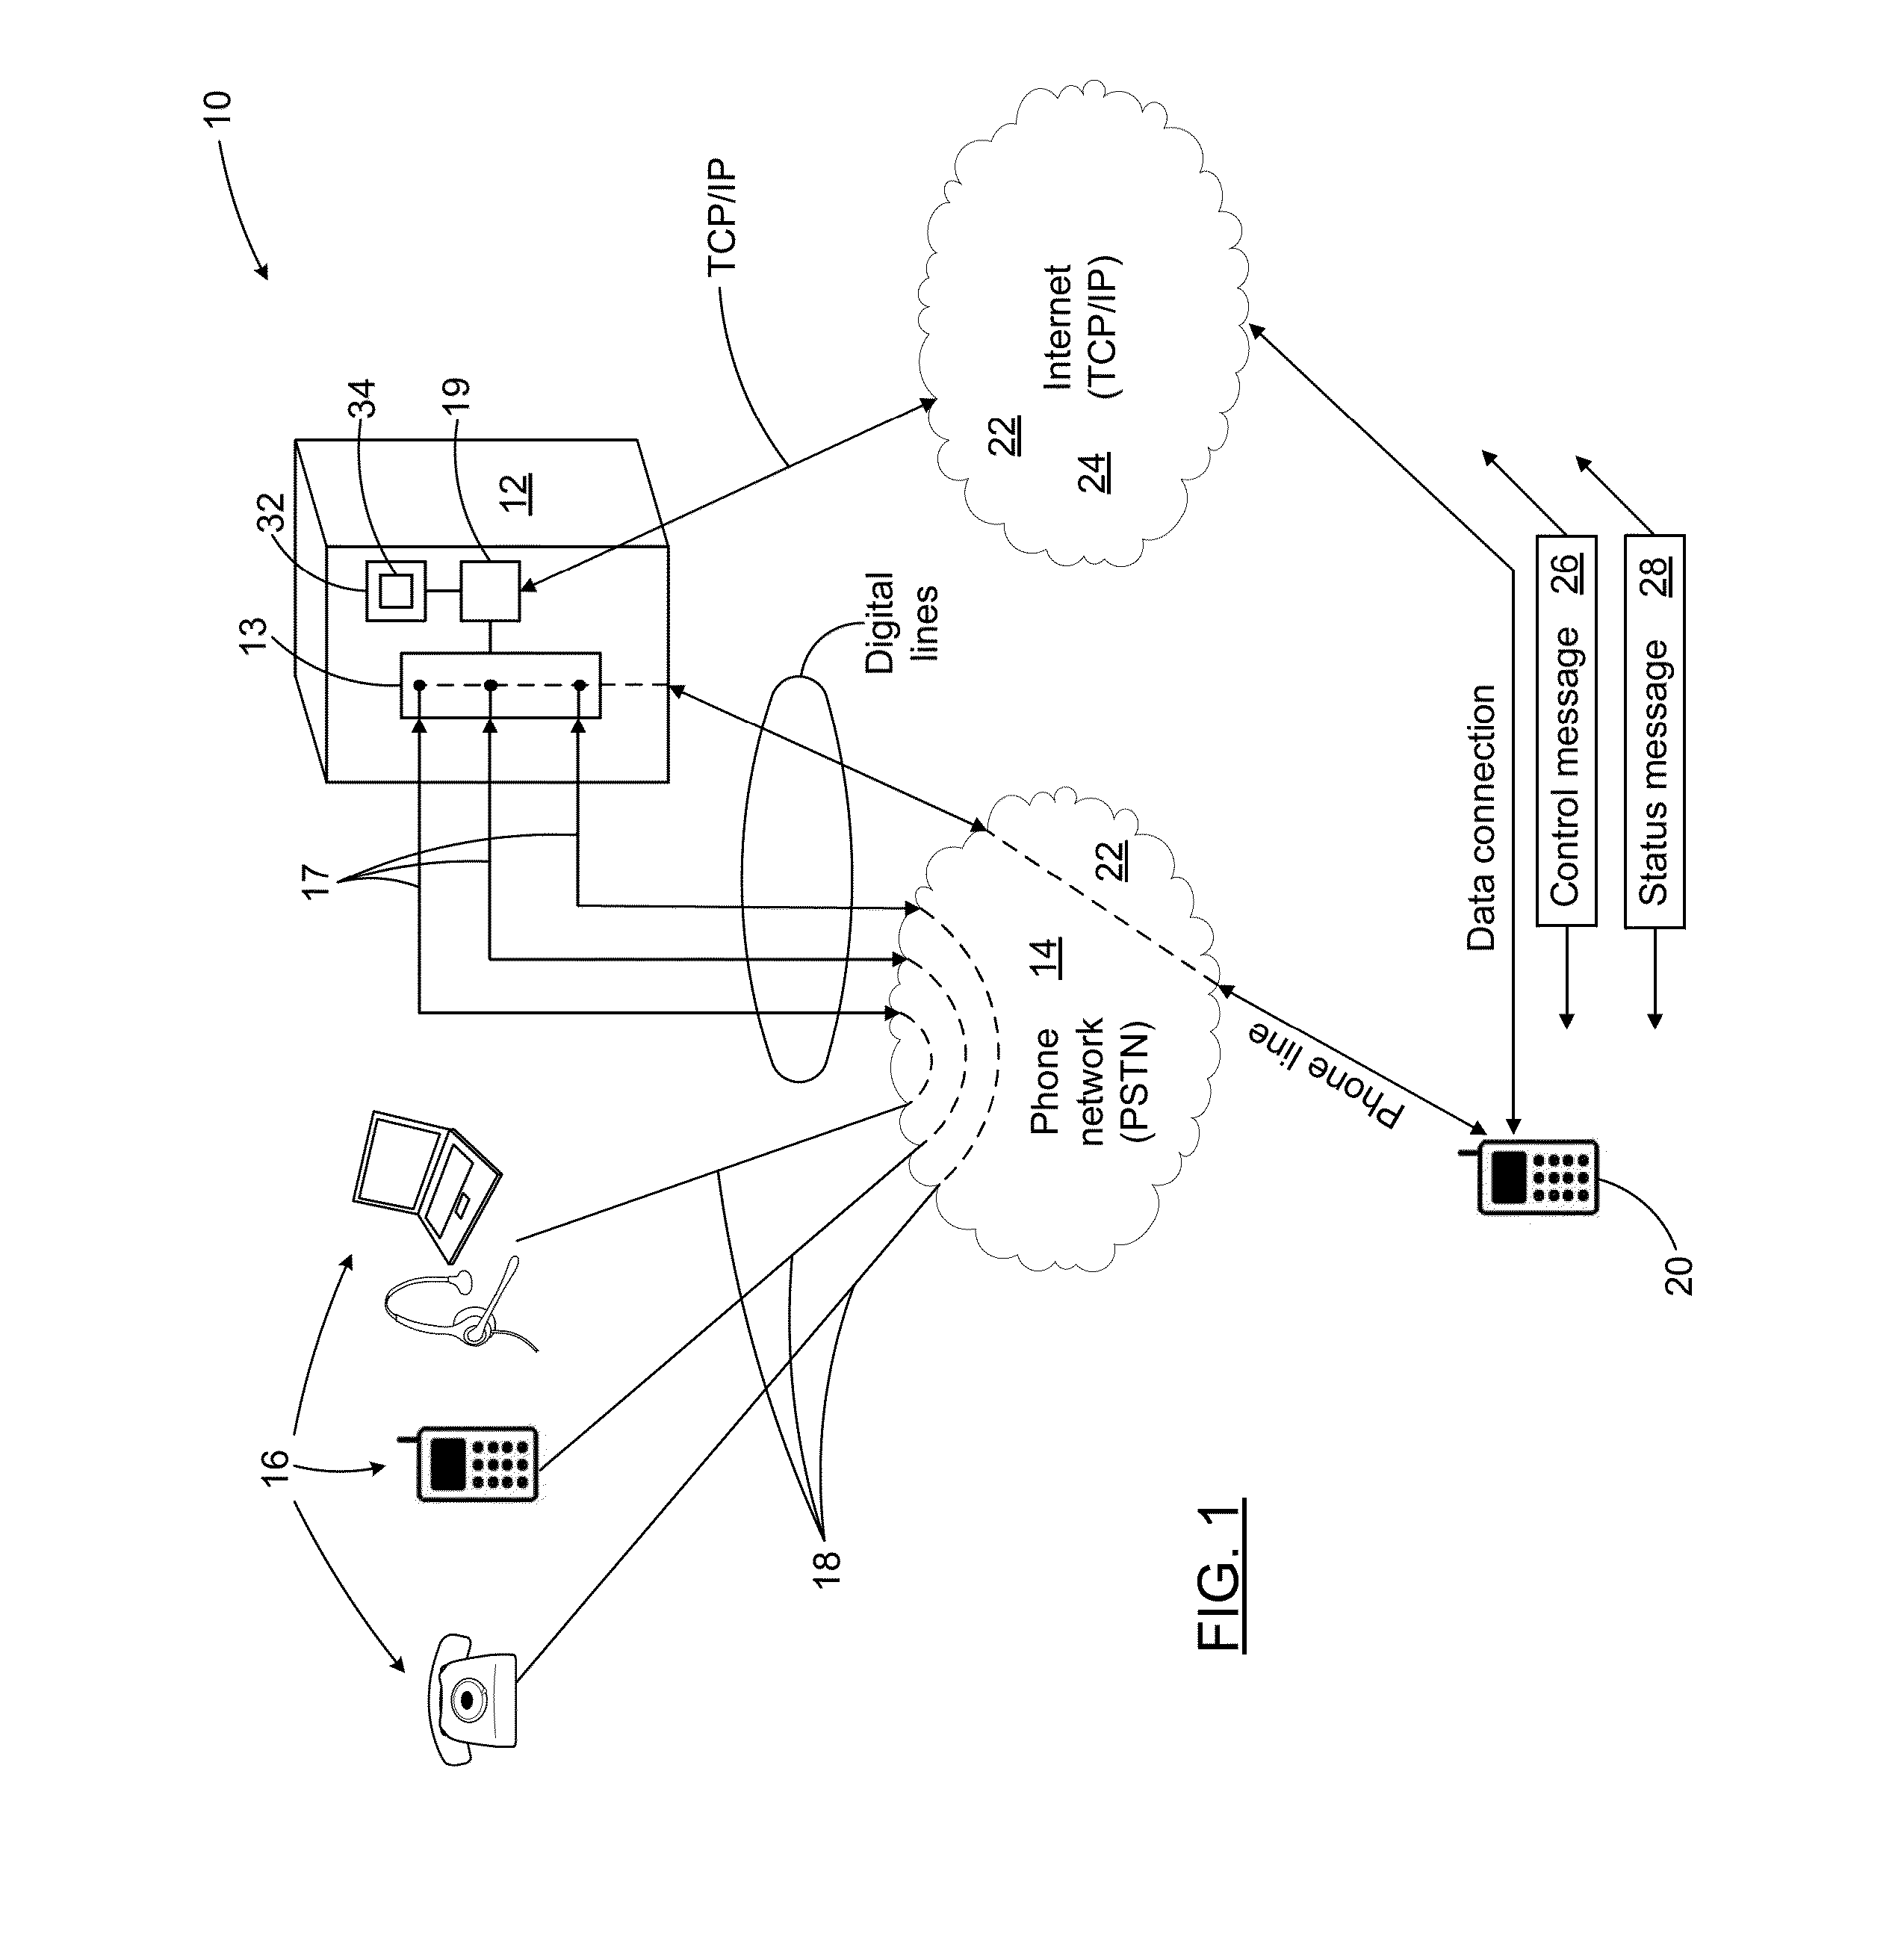 Multiple call session system and method for a mobile phone